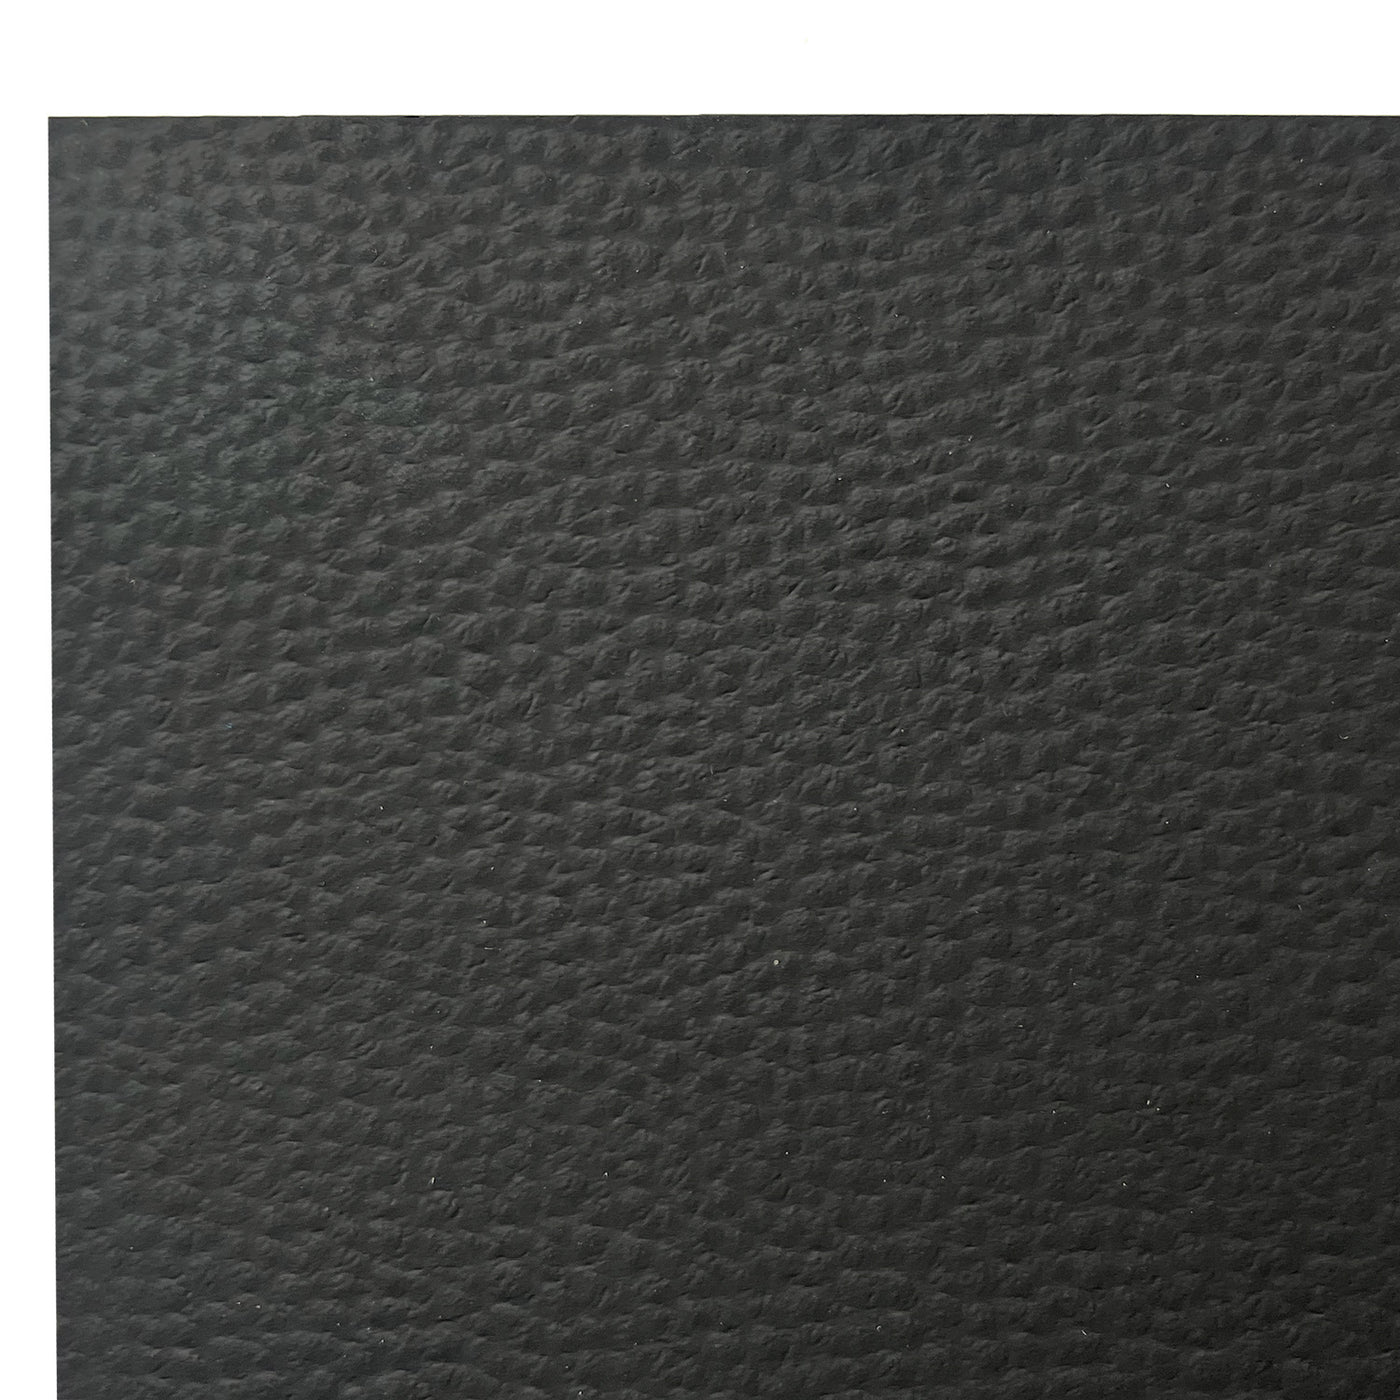 CLASSIC BLACK - 12x12 Faux Leather Cardstock - Leatherlike